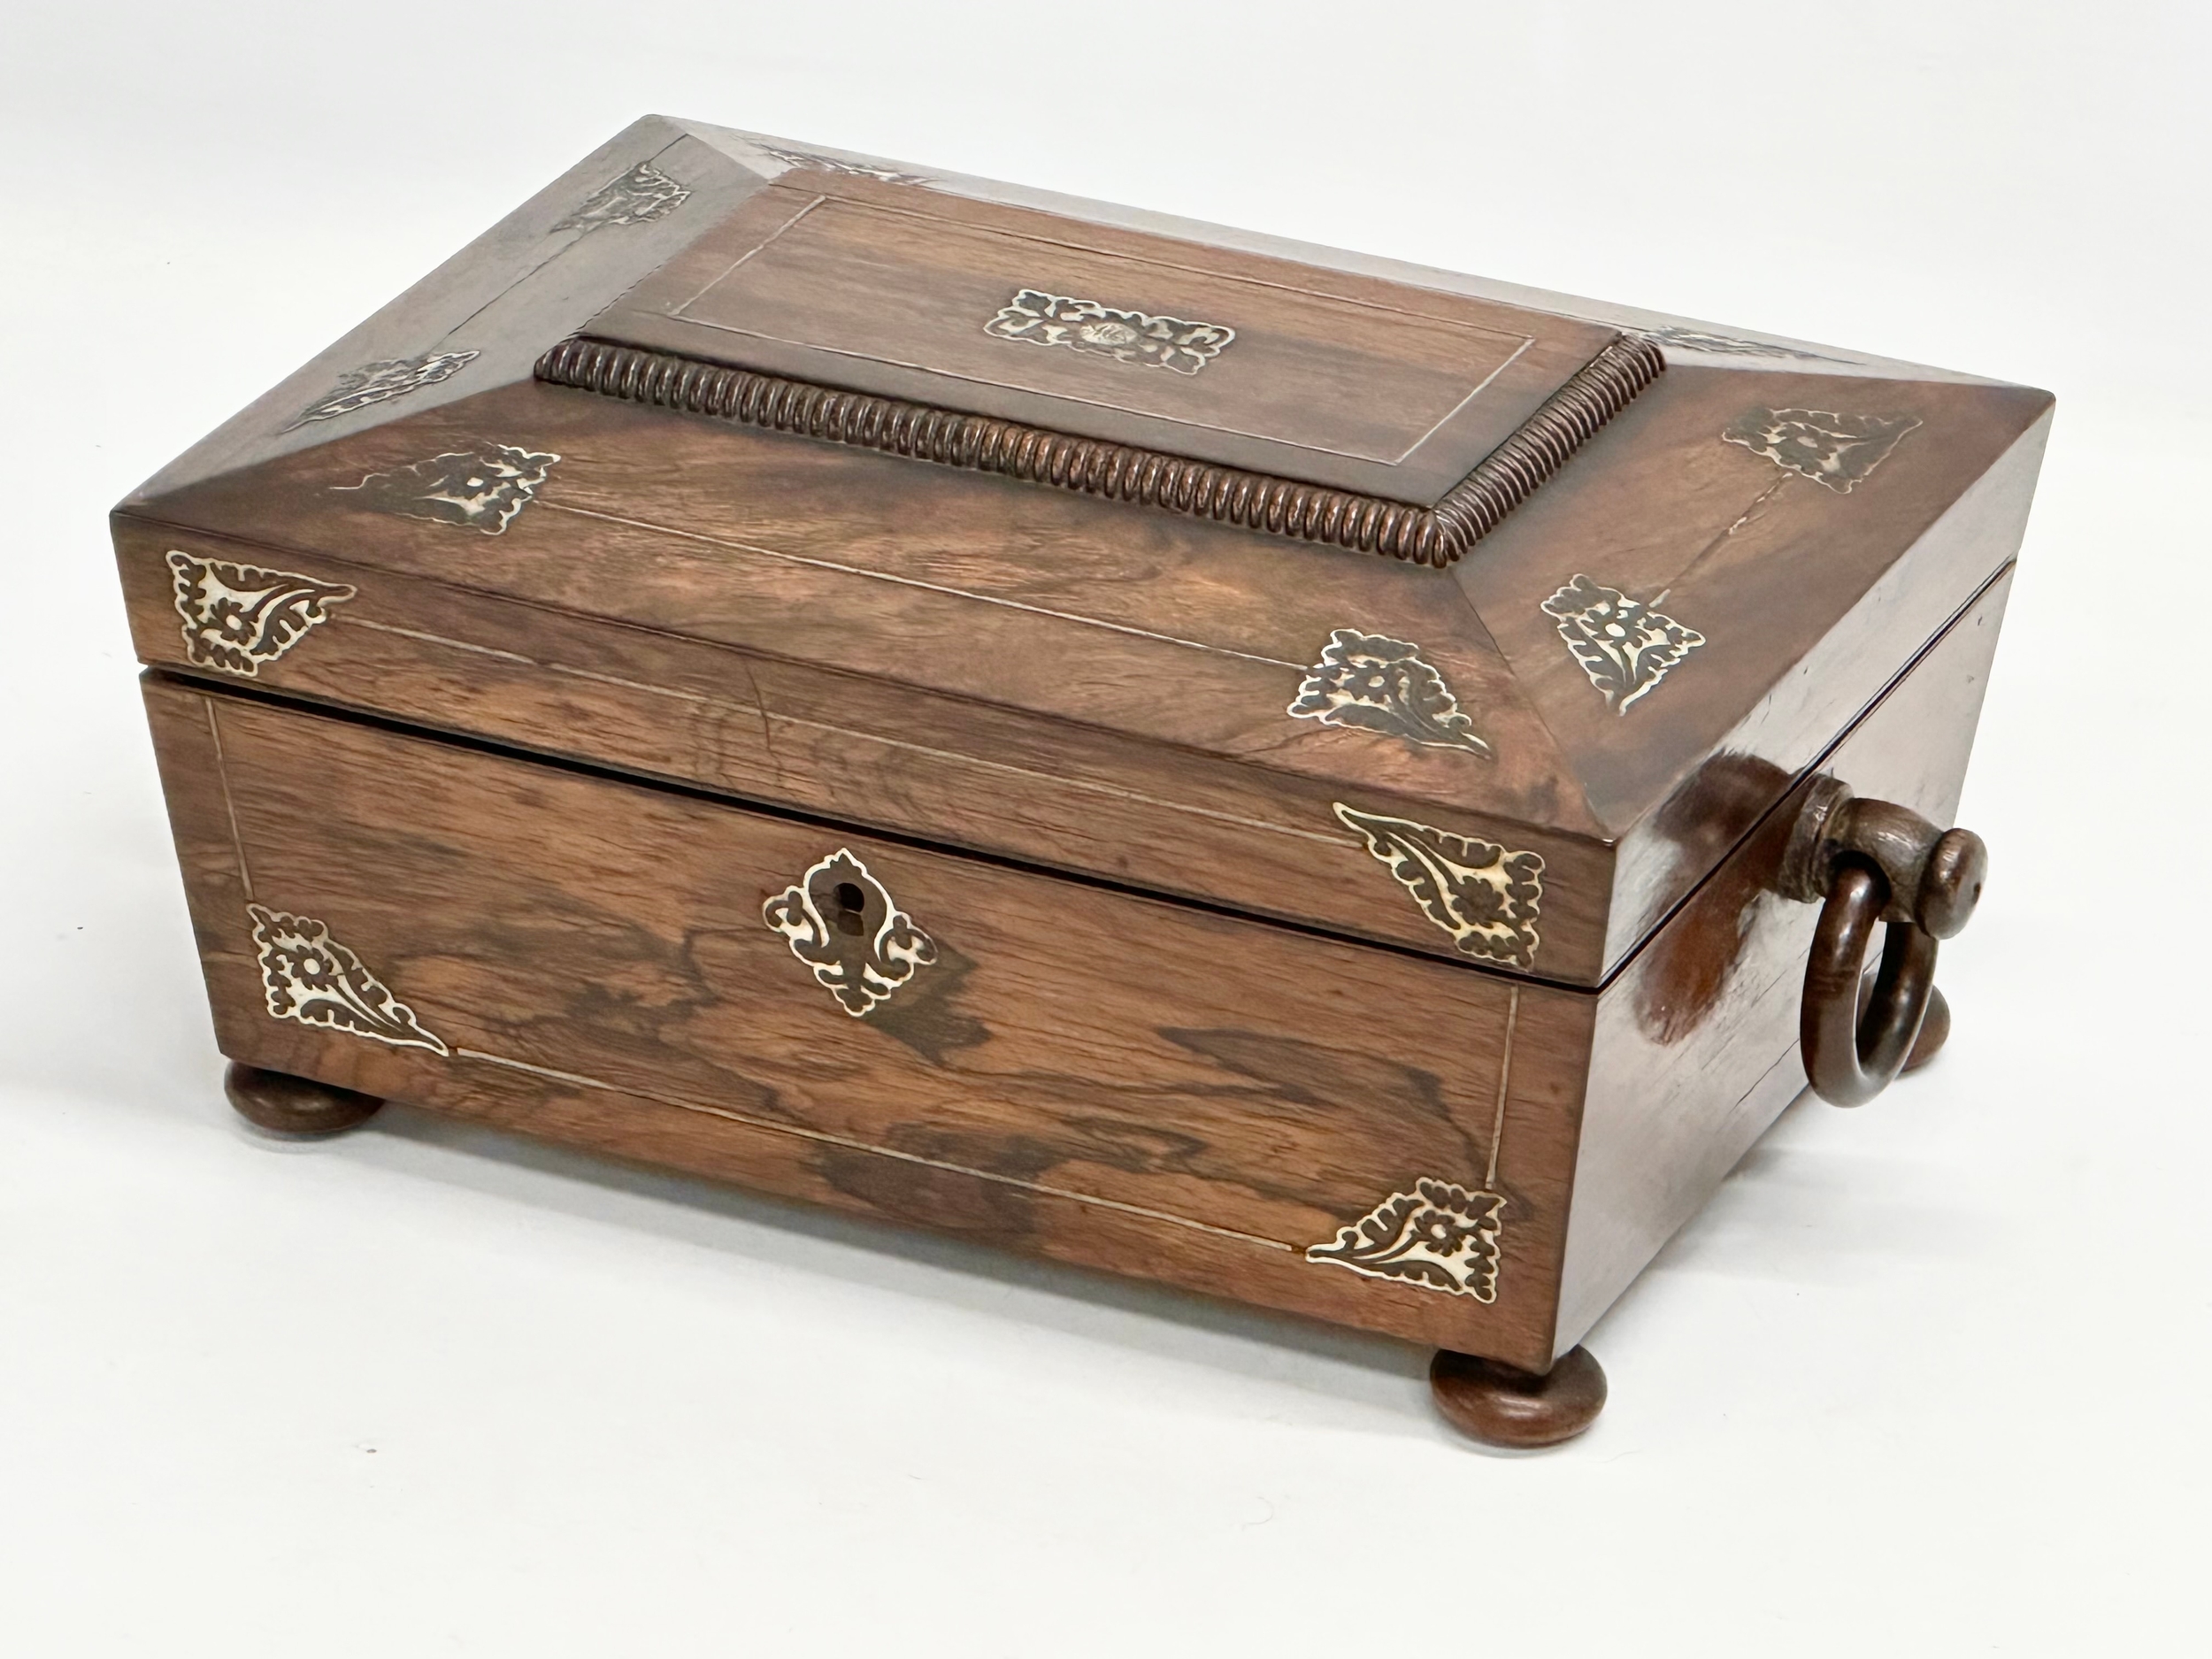 A Regency rosewood and Mother of Pearl sarcophagus shaped sewing box. Early 19th Century. Circa